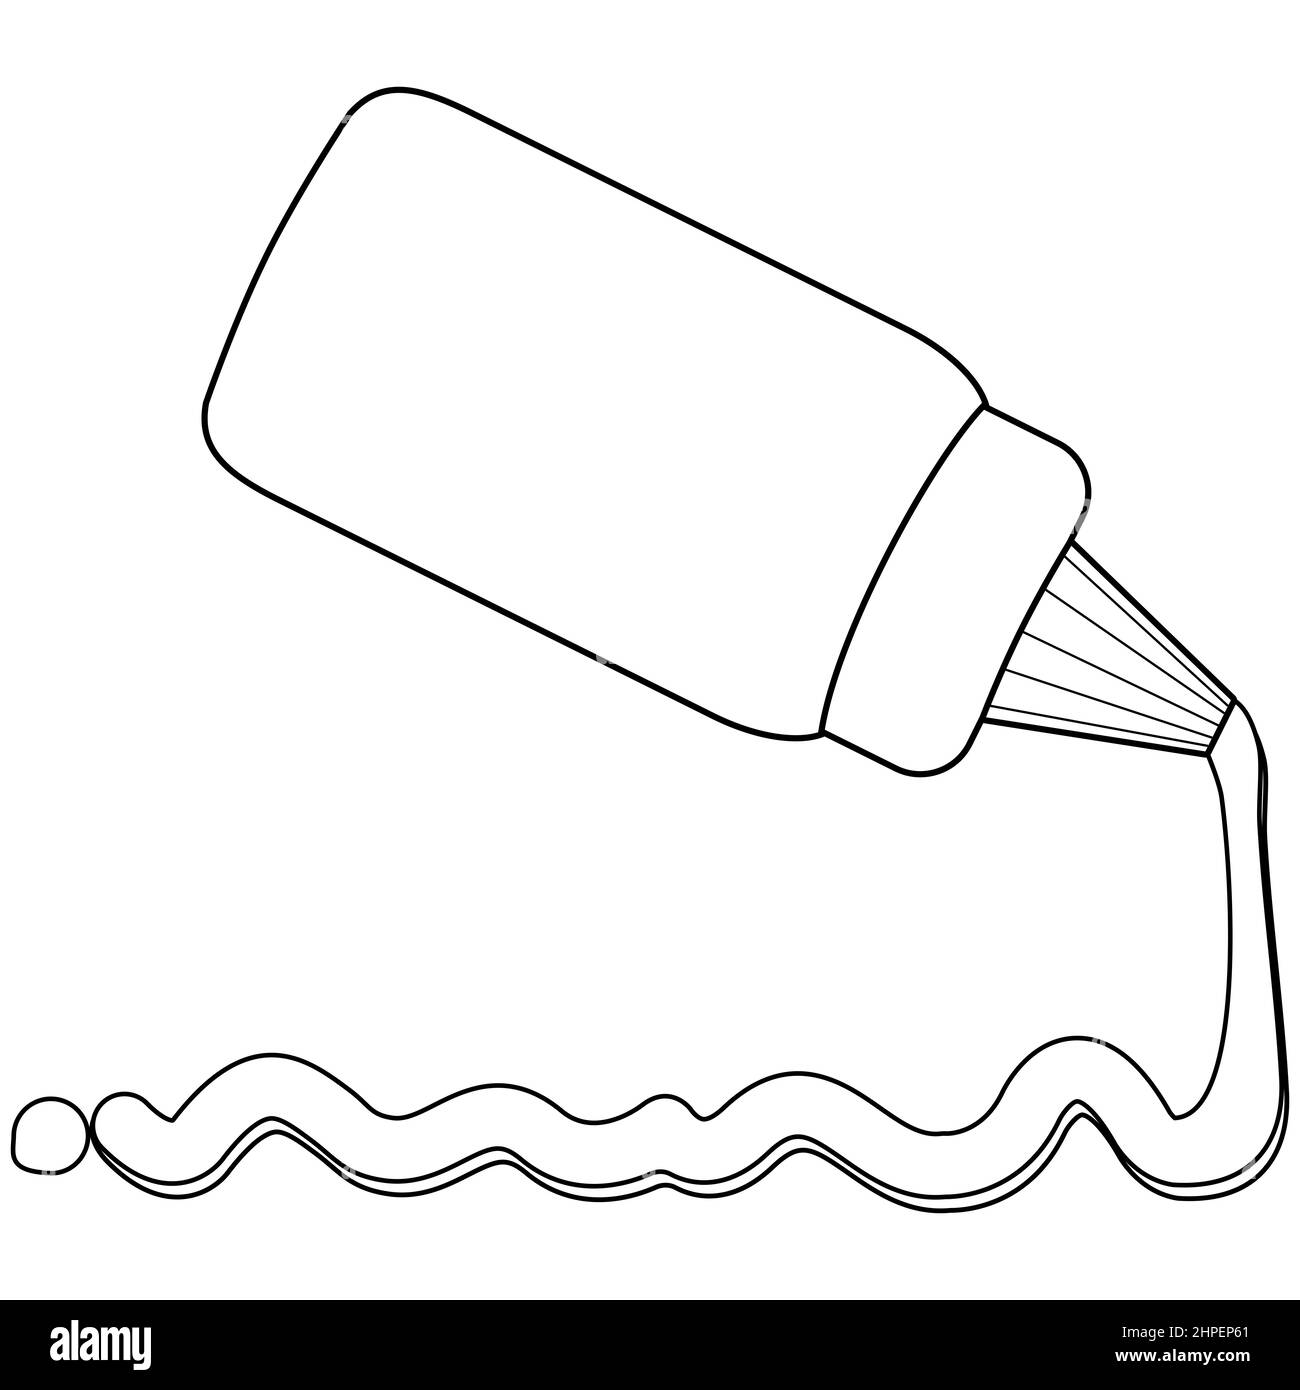 Bottle and spilled sauce of mustard or ketchup. Black and white coloring page. Stock Photo